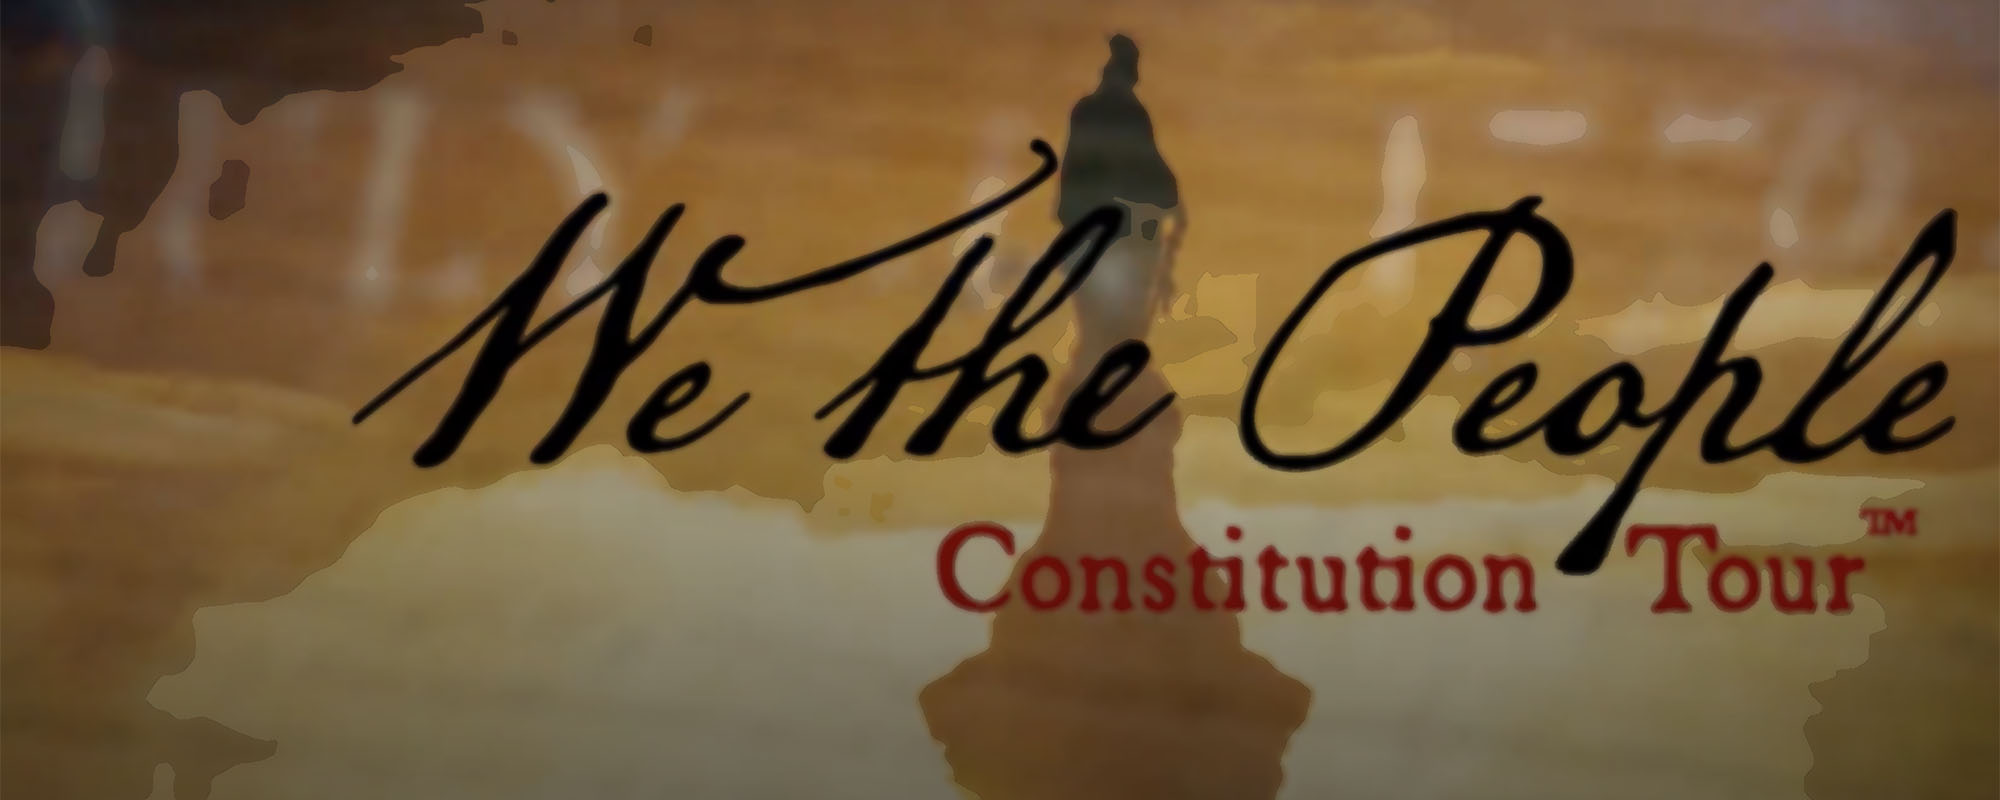 We The People Constitution Tour Video